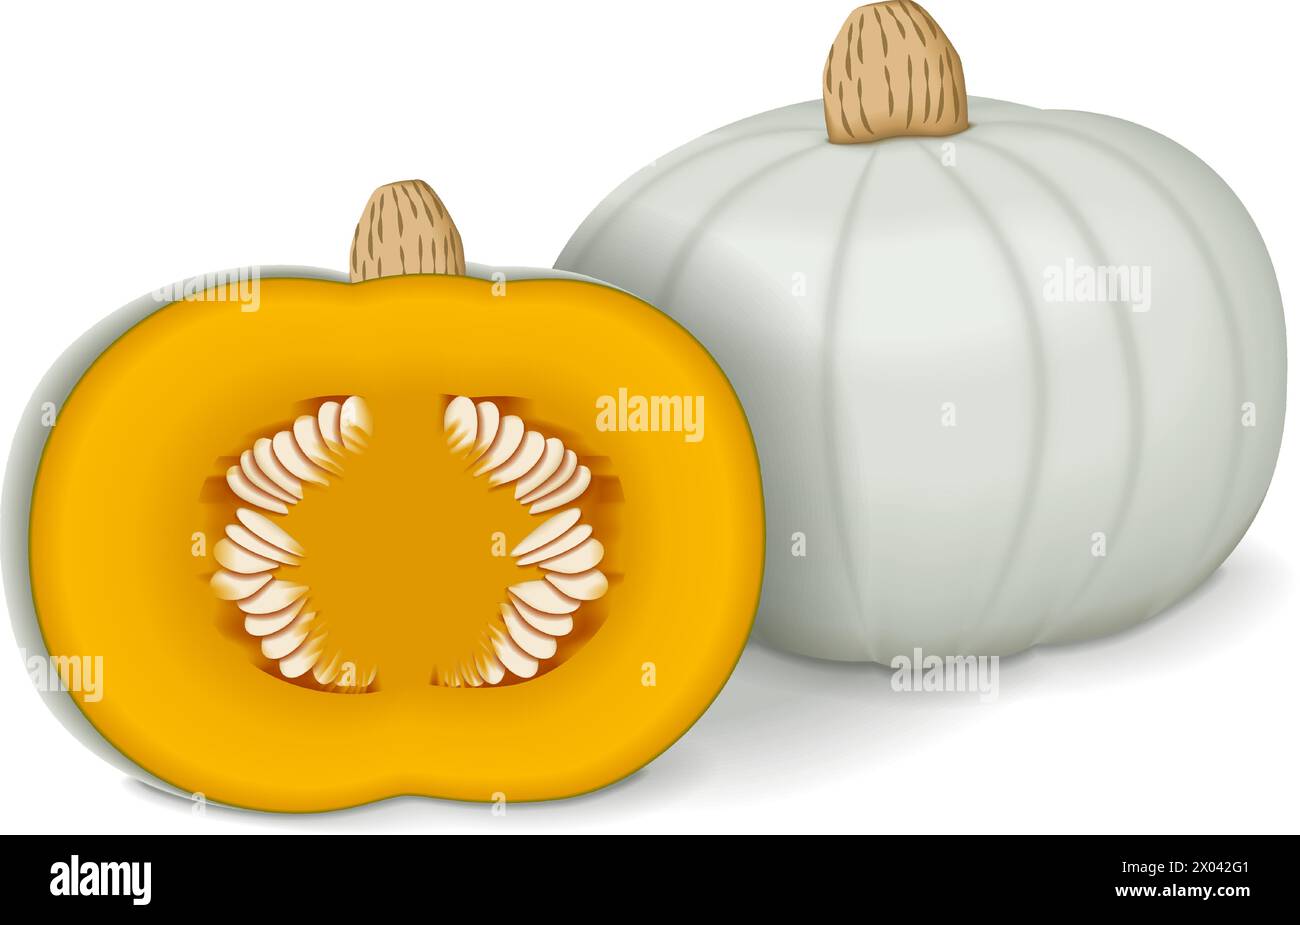 Whole and half of Crown Prince Squash. Winter squash. Cucurbita maxima. Fruits and vegetables. Isolated vector illustration. Stock Vector